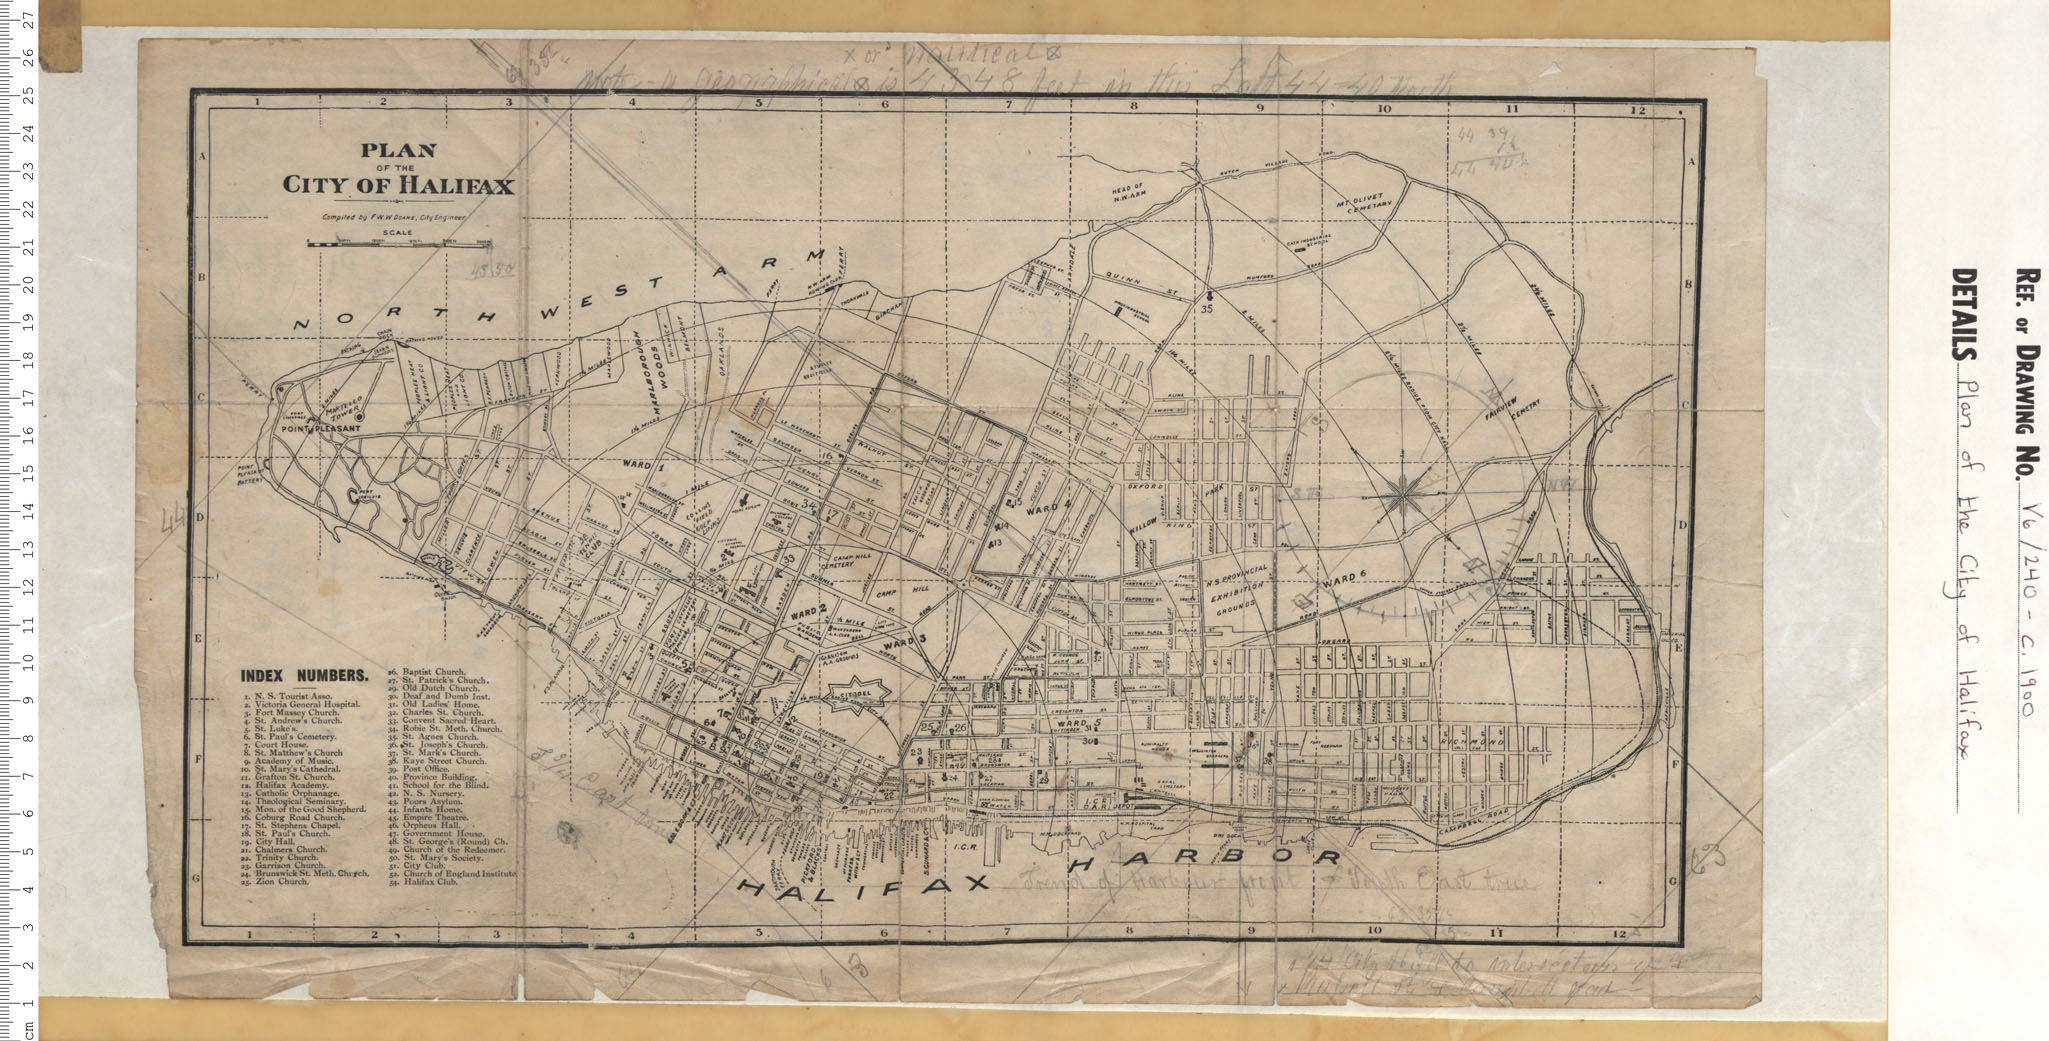 Plan of the City of Halifax